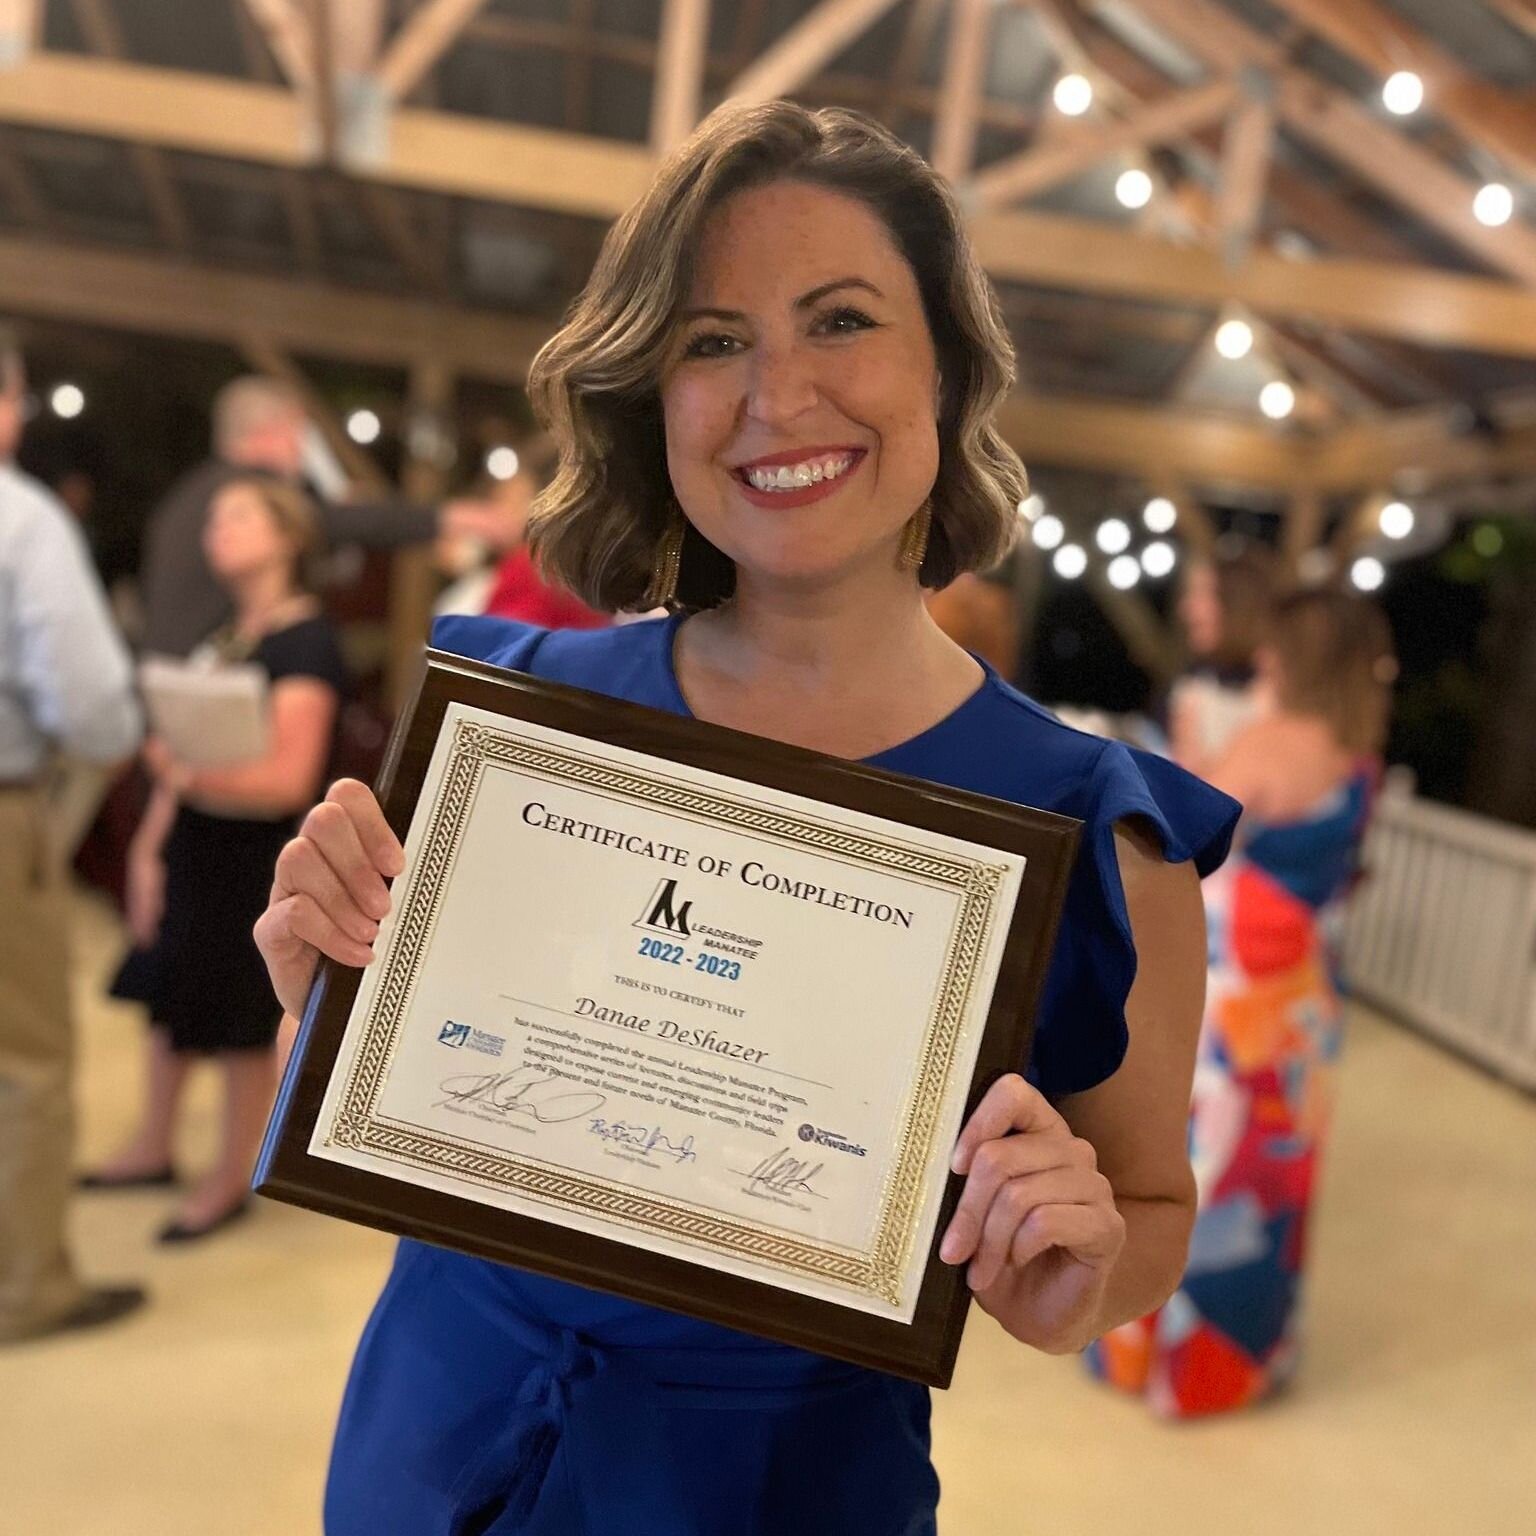 Congratulations to this Leadership Manatee grad, Danae! 🎓 #MakingWaves

This past month, our Director of Brand Strategy wrapped up her participation with Manatee Chamber of Commerce's Leadership Manatee program. (@manateechamber)

For the past 7 mon